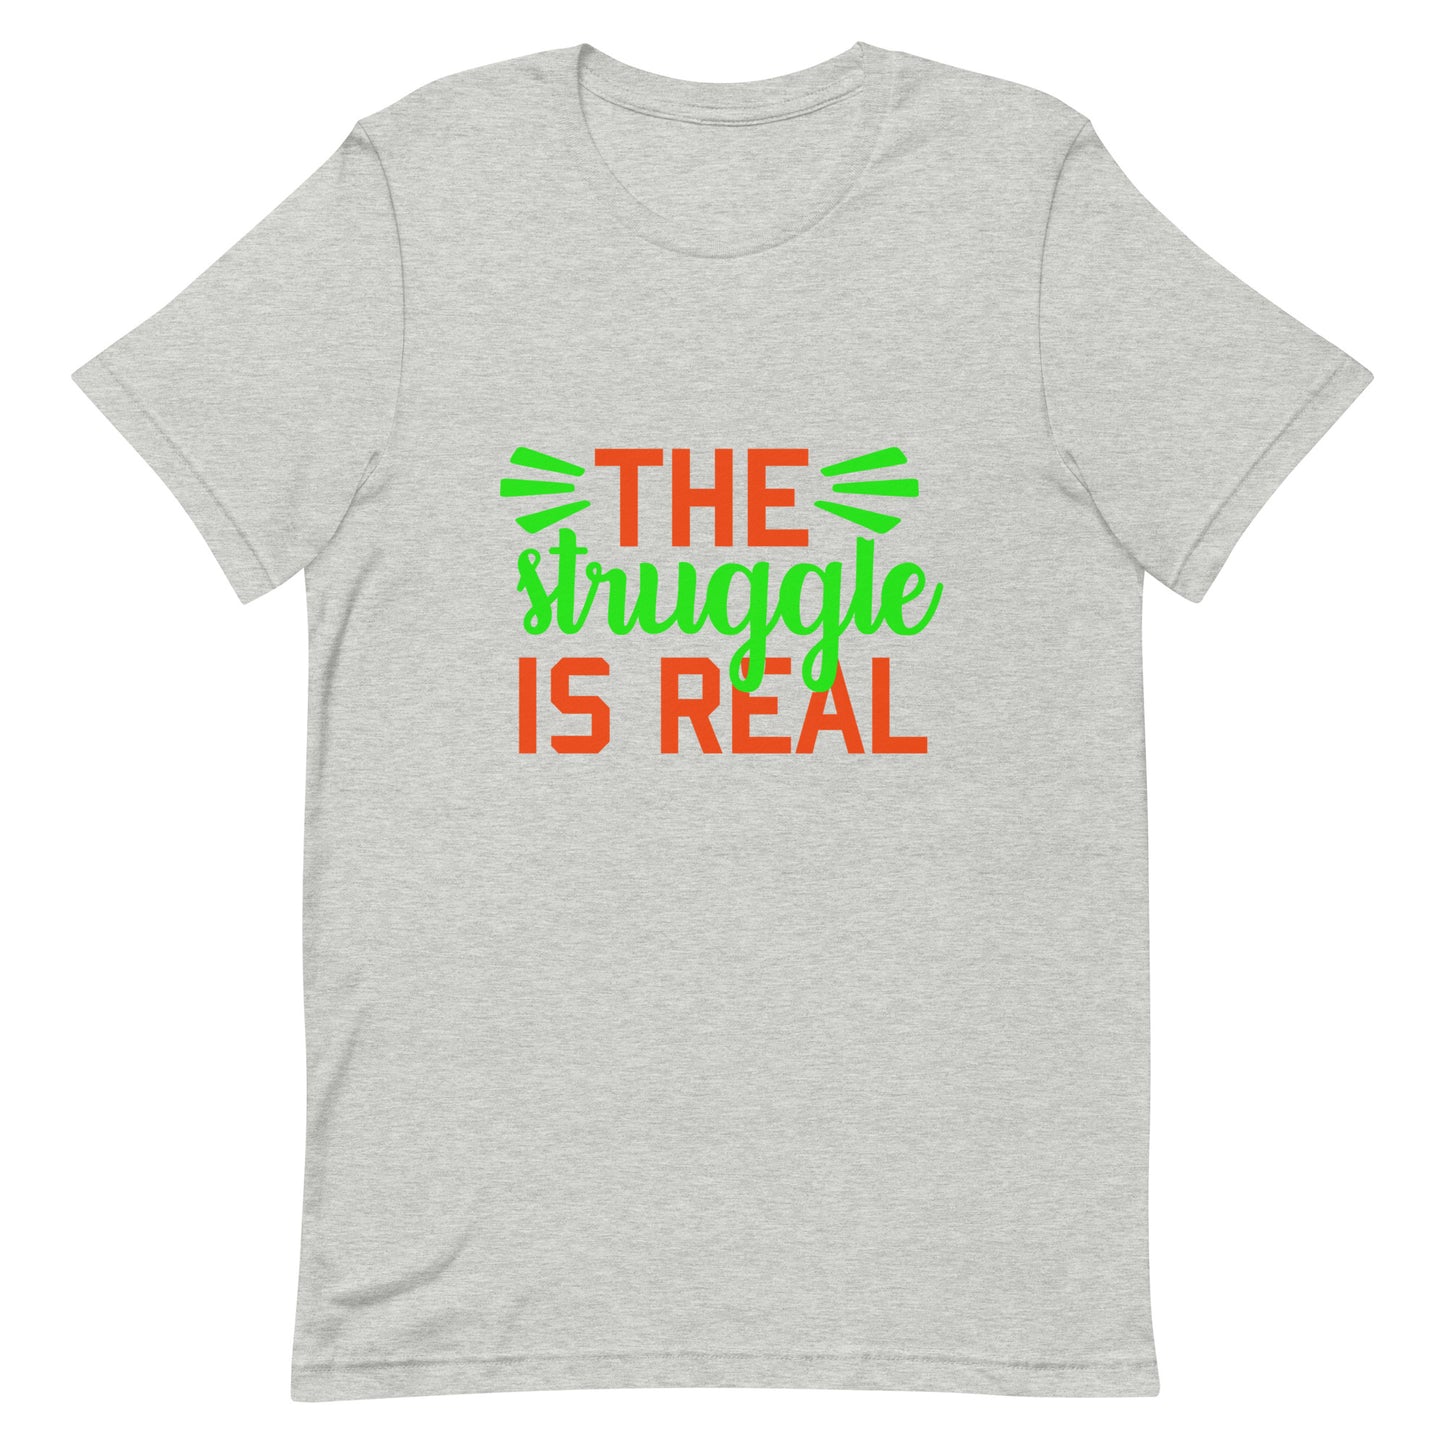 The Struggle is Real Unisex t-shirt